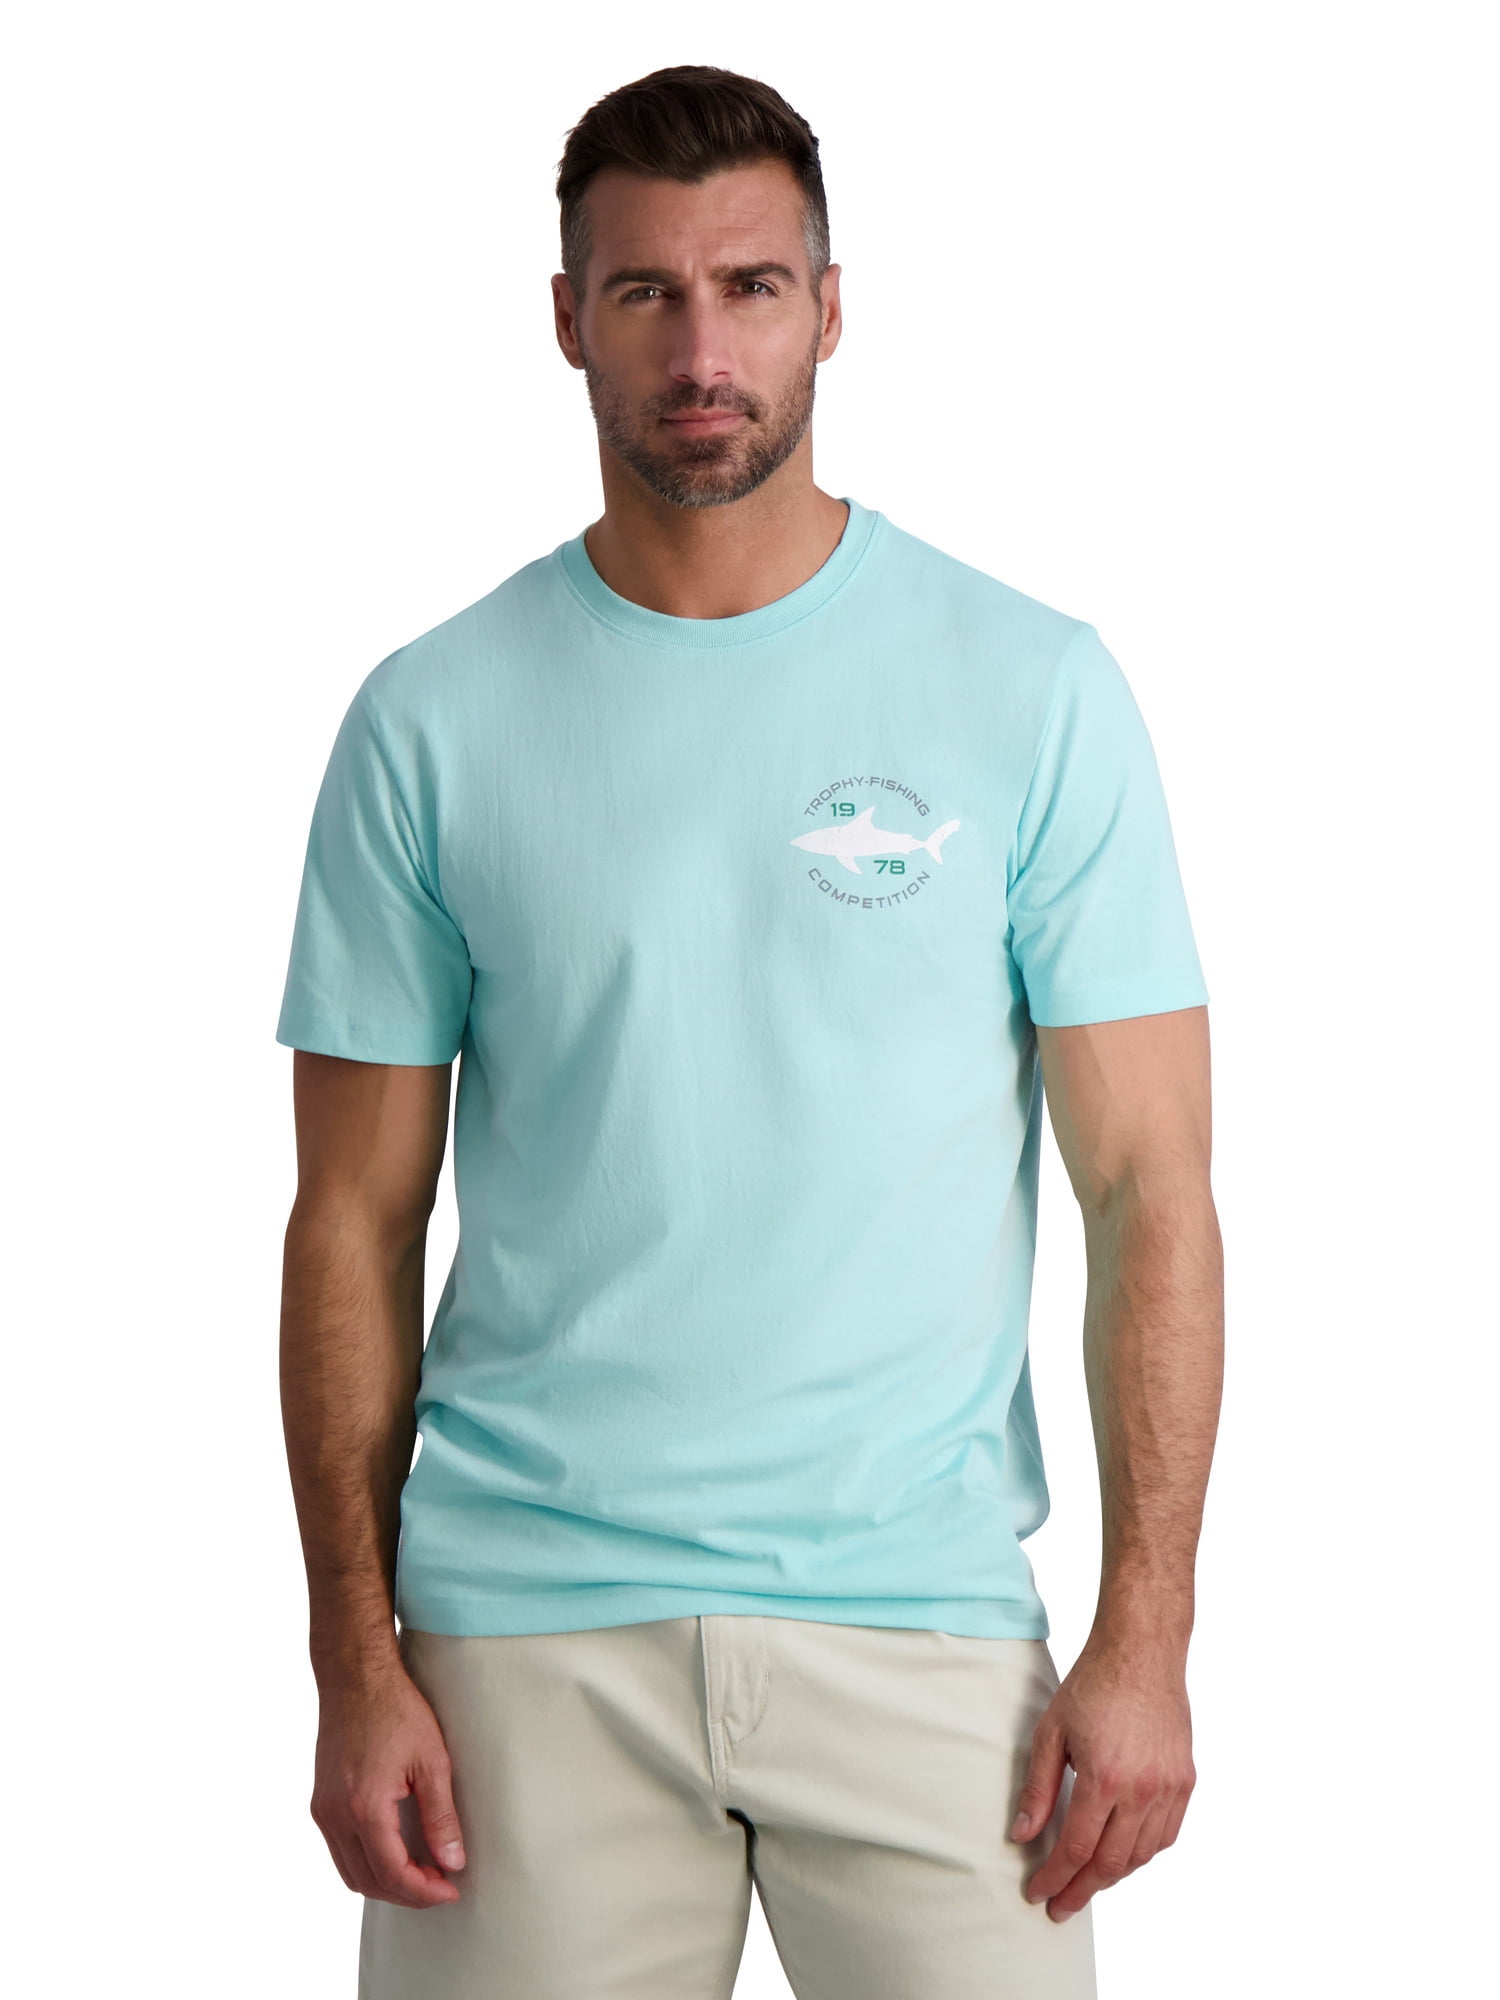 Chaps Men's Short Sleeve Graphic Tee -Sizes XS up to 4XB - Walmart.com